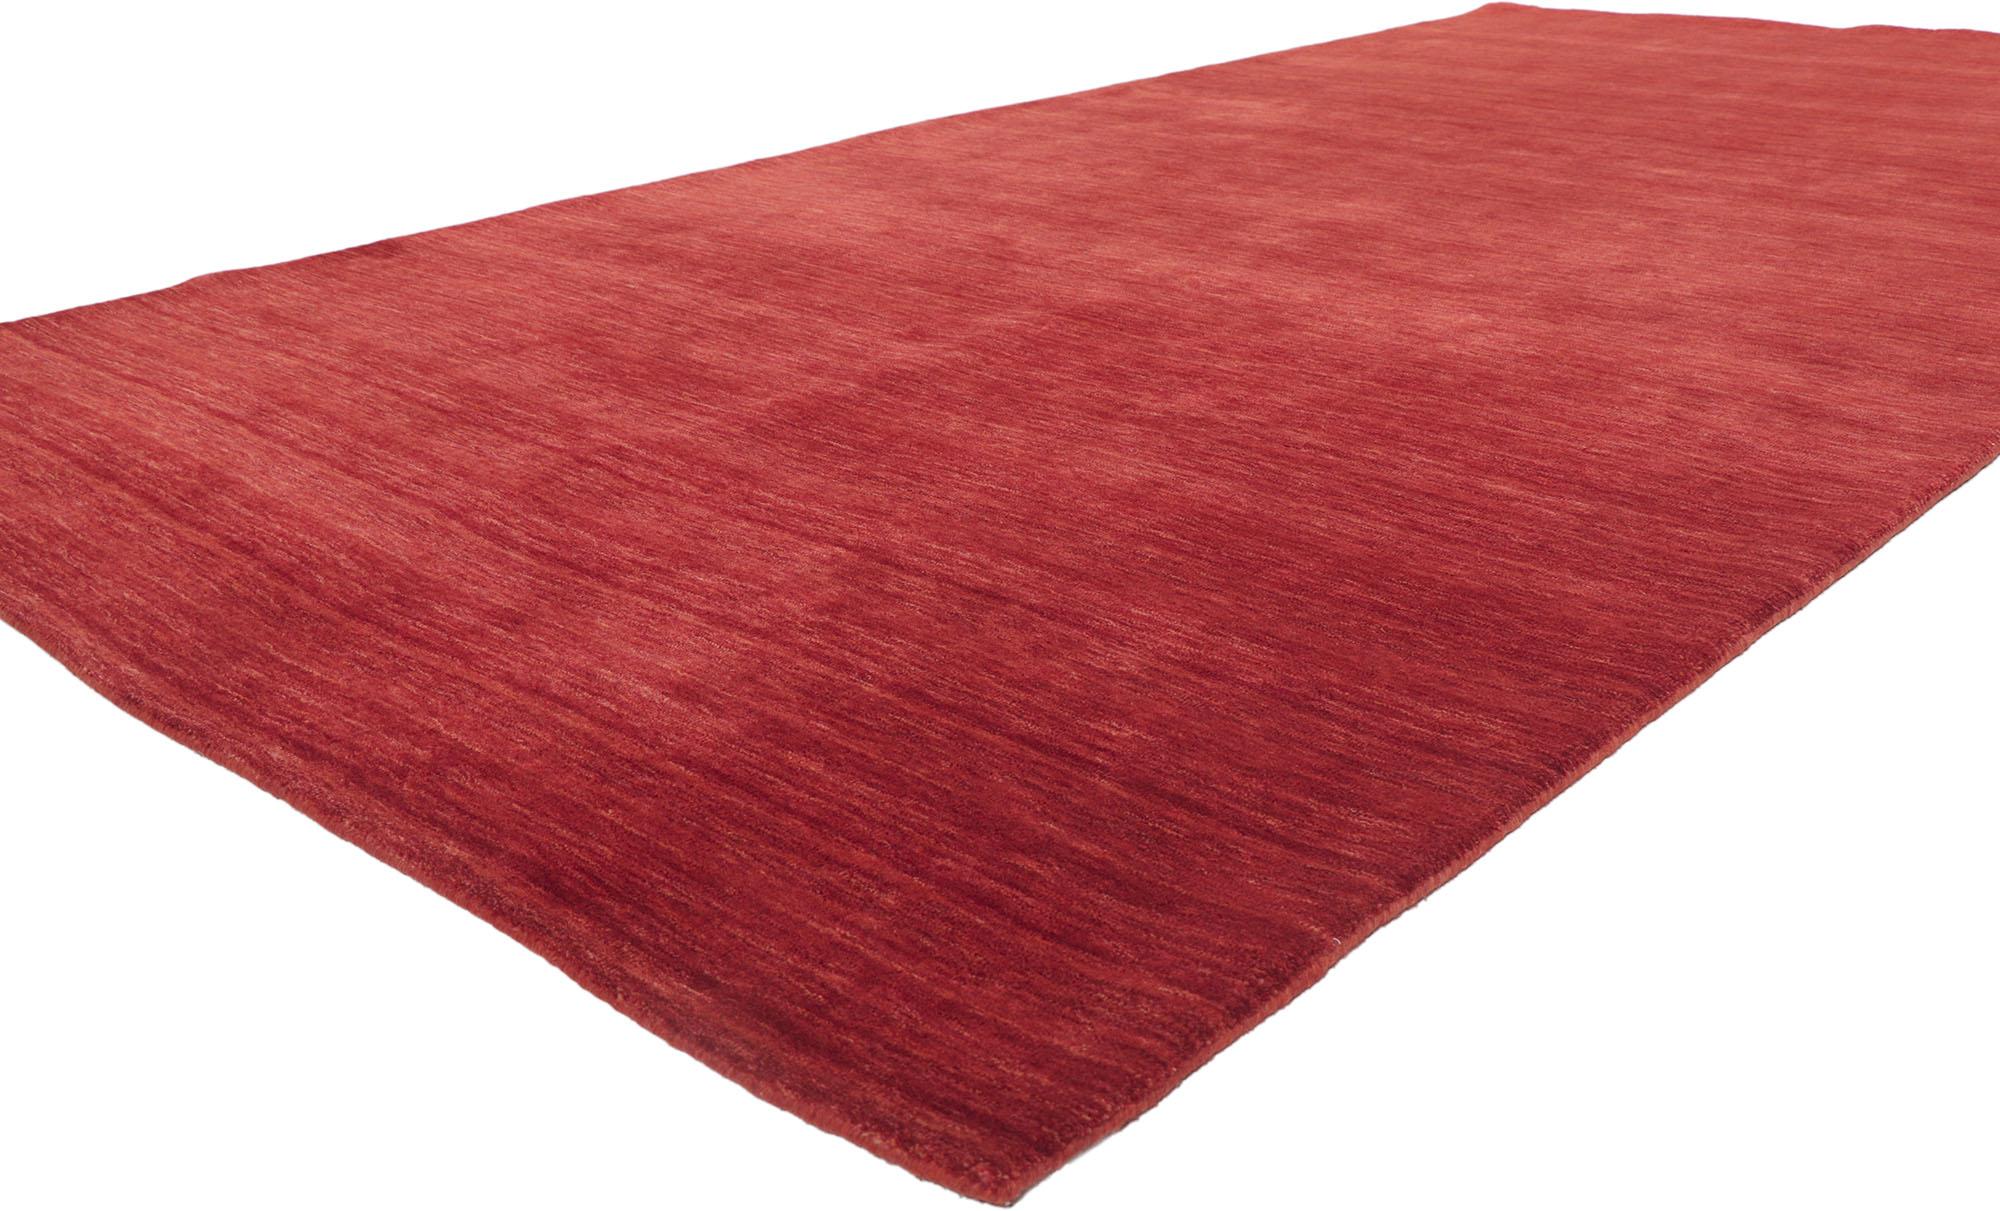 30735 New Contemporary Red Gallery rug with Modern Style 06'01 x 11'10. Effortless, elegant, and casual meets the eye in this contemporary Indian area rug. It features gorgeous red hues and softly gradated striations running selvage to selvage